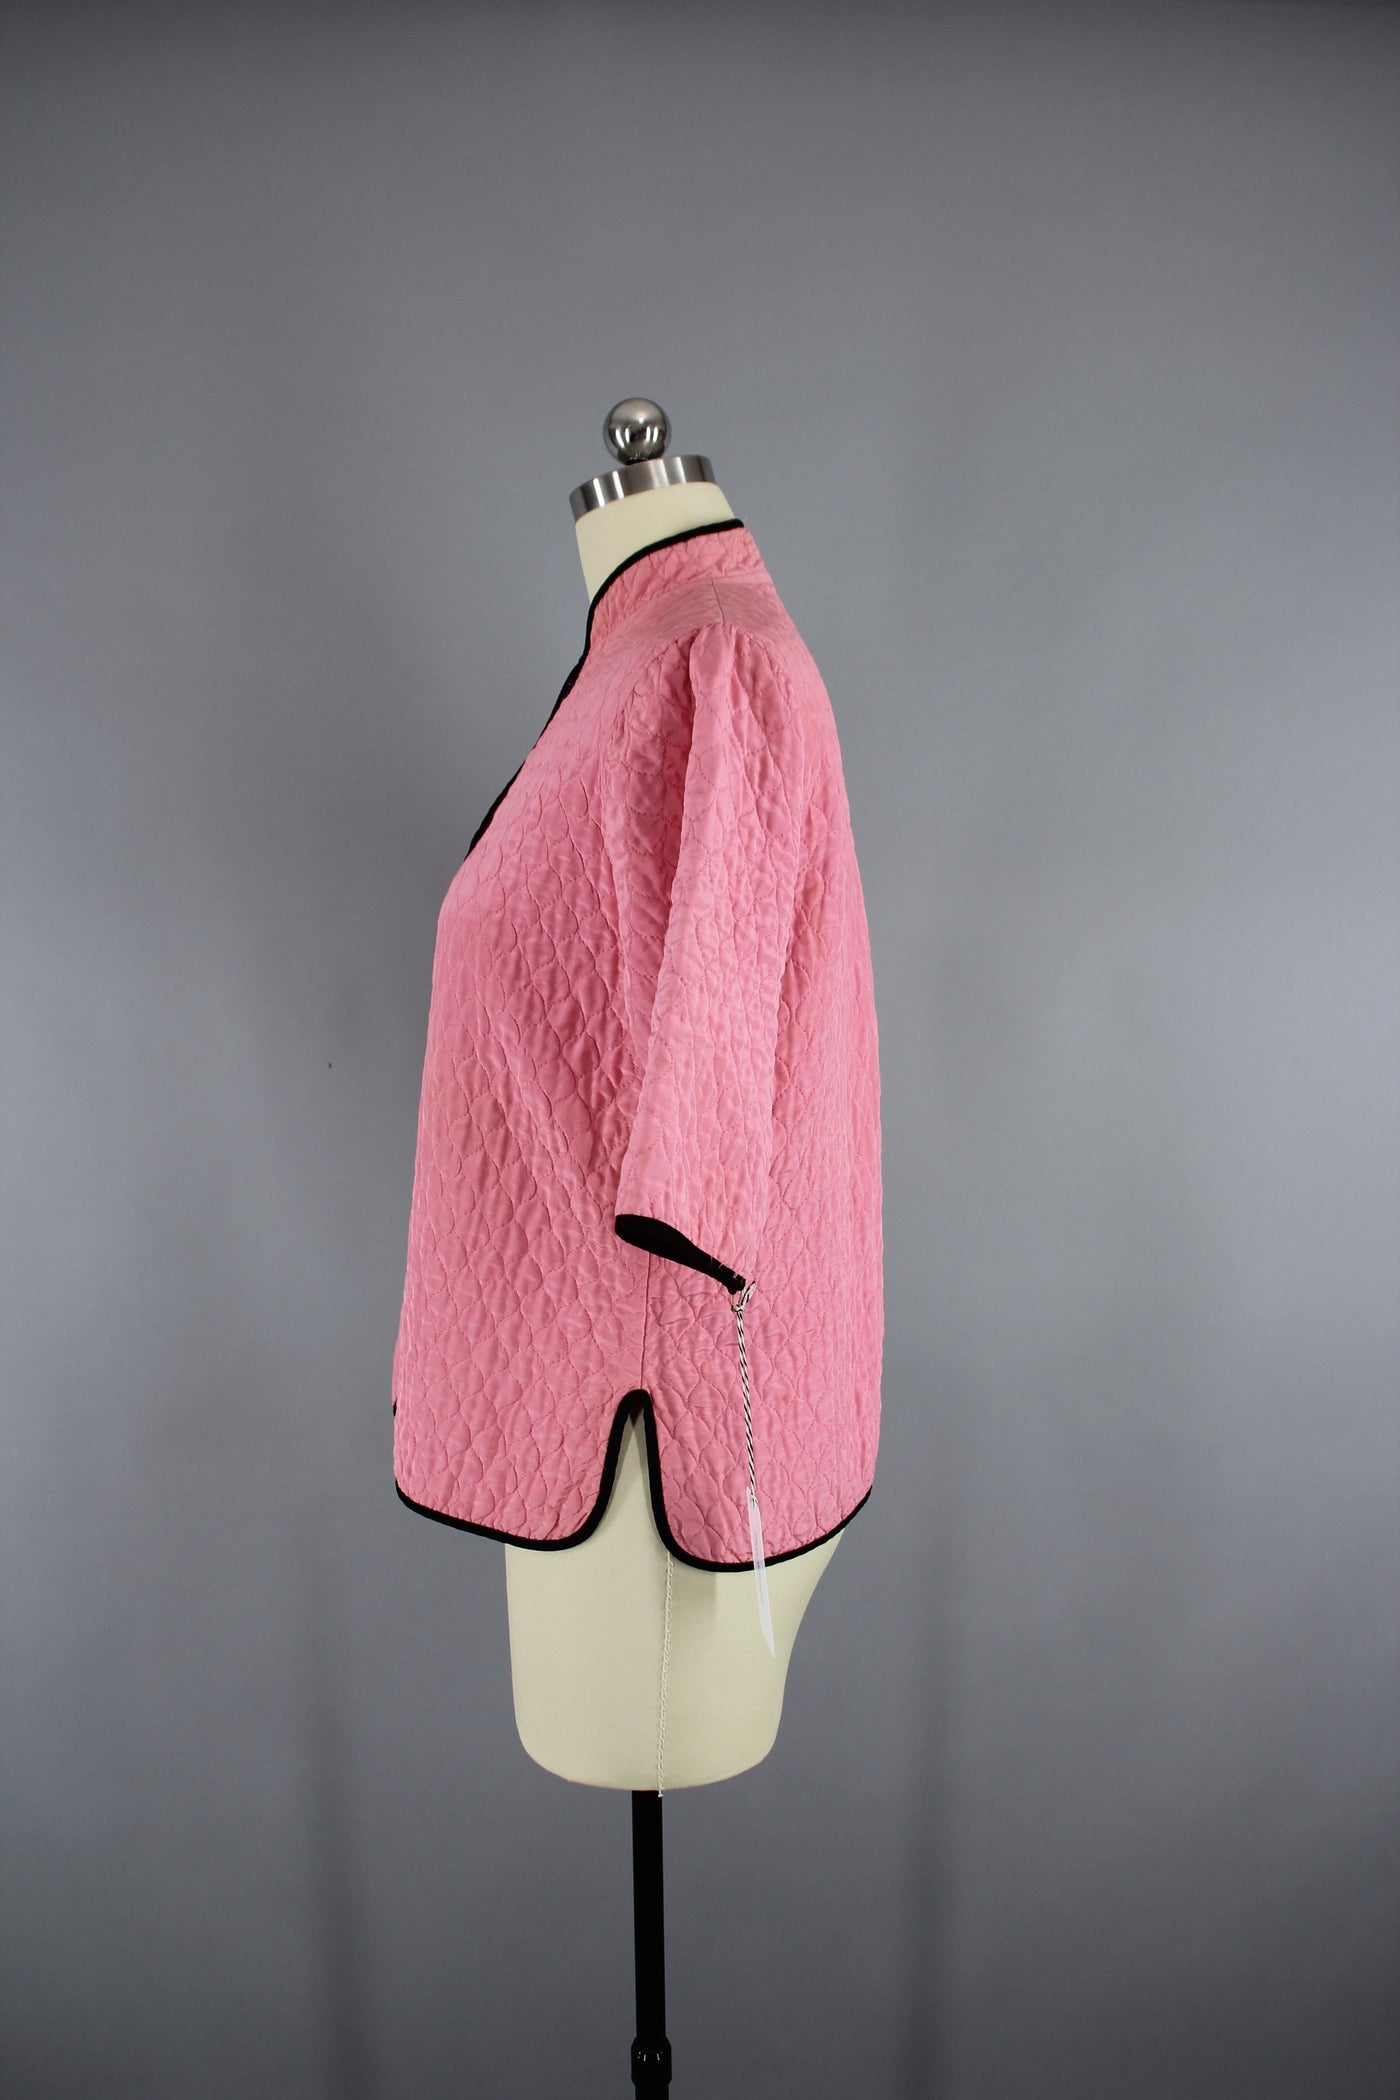 Vintage 1940s Bed Jacket / Carnation Pink Quilted Rayon - ThisBlueBird